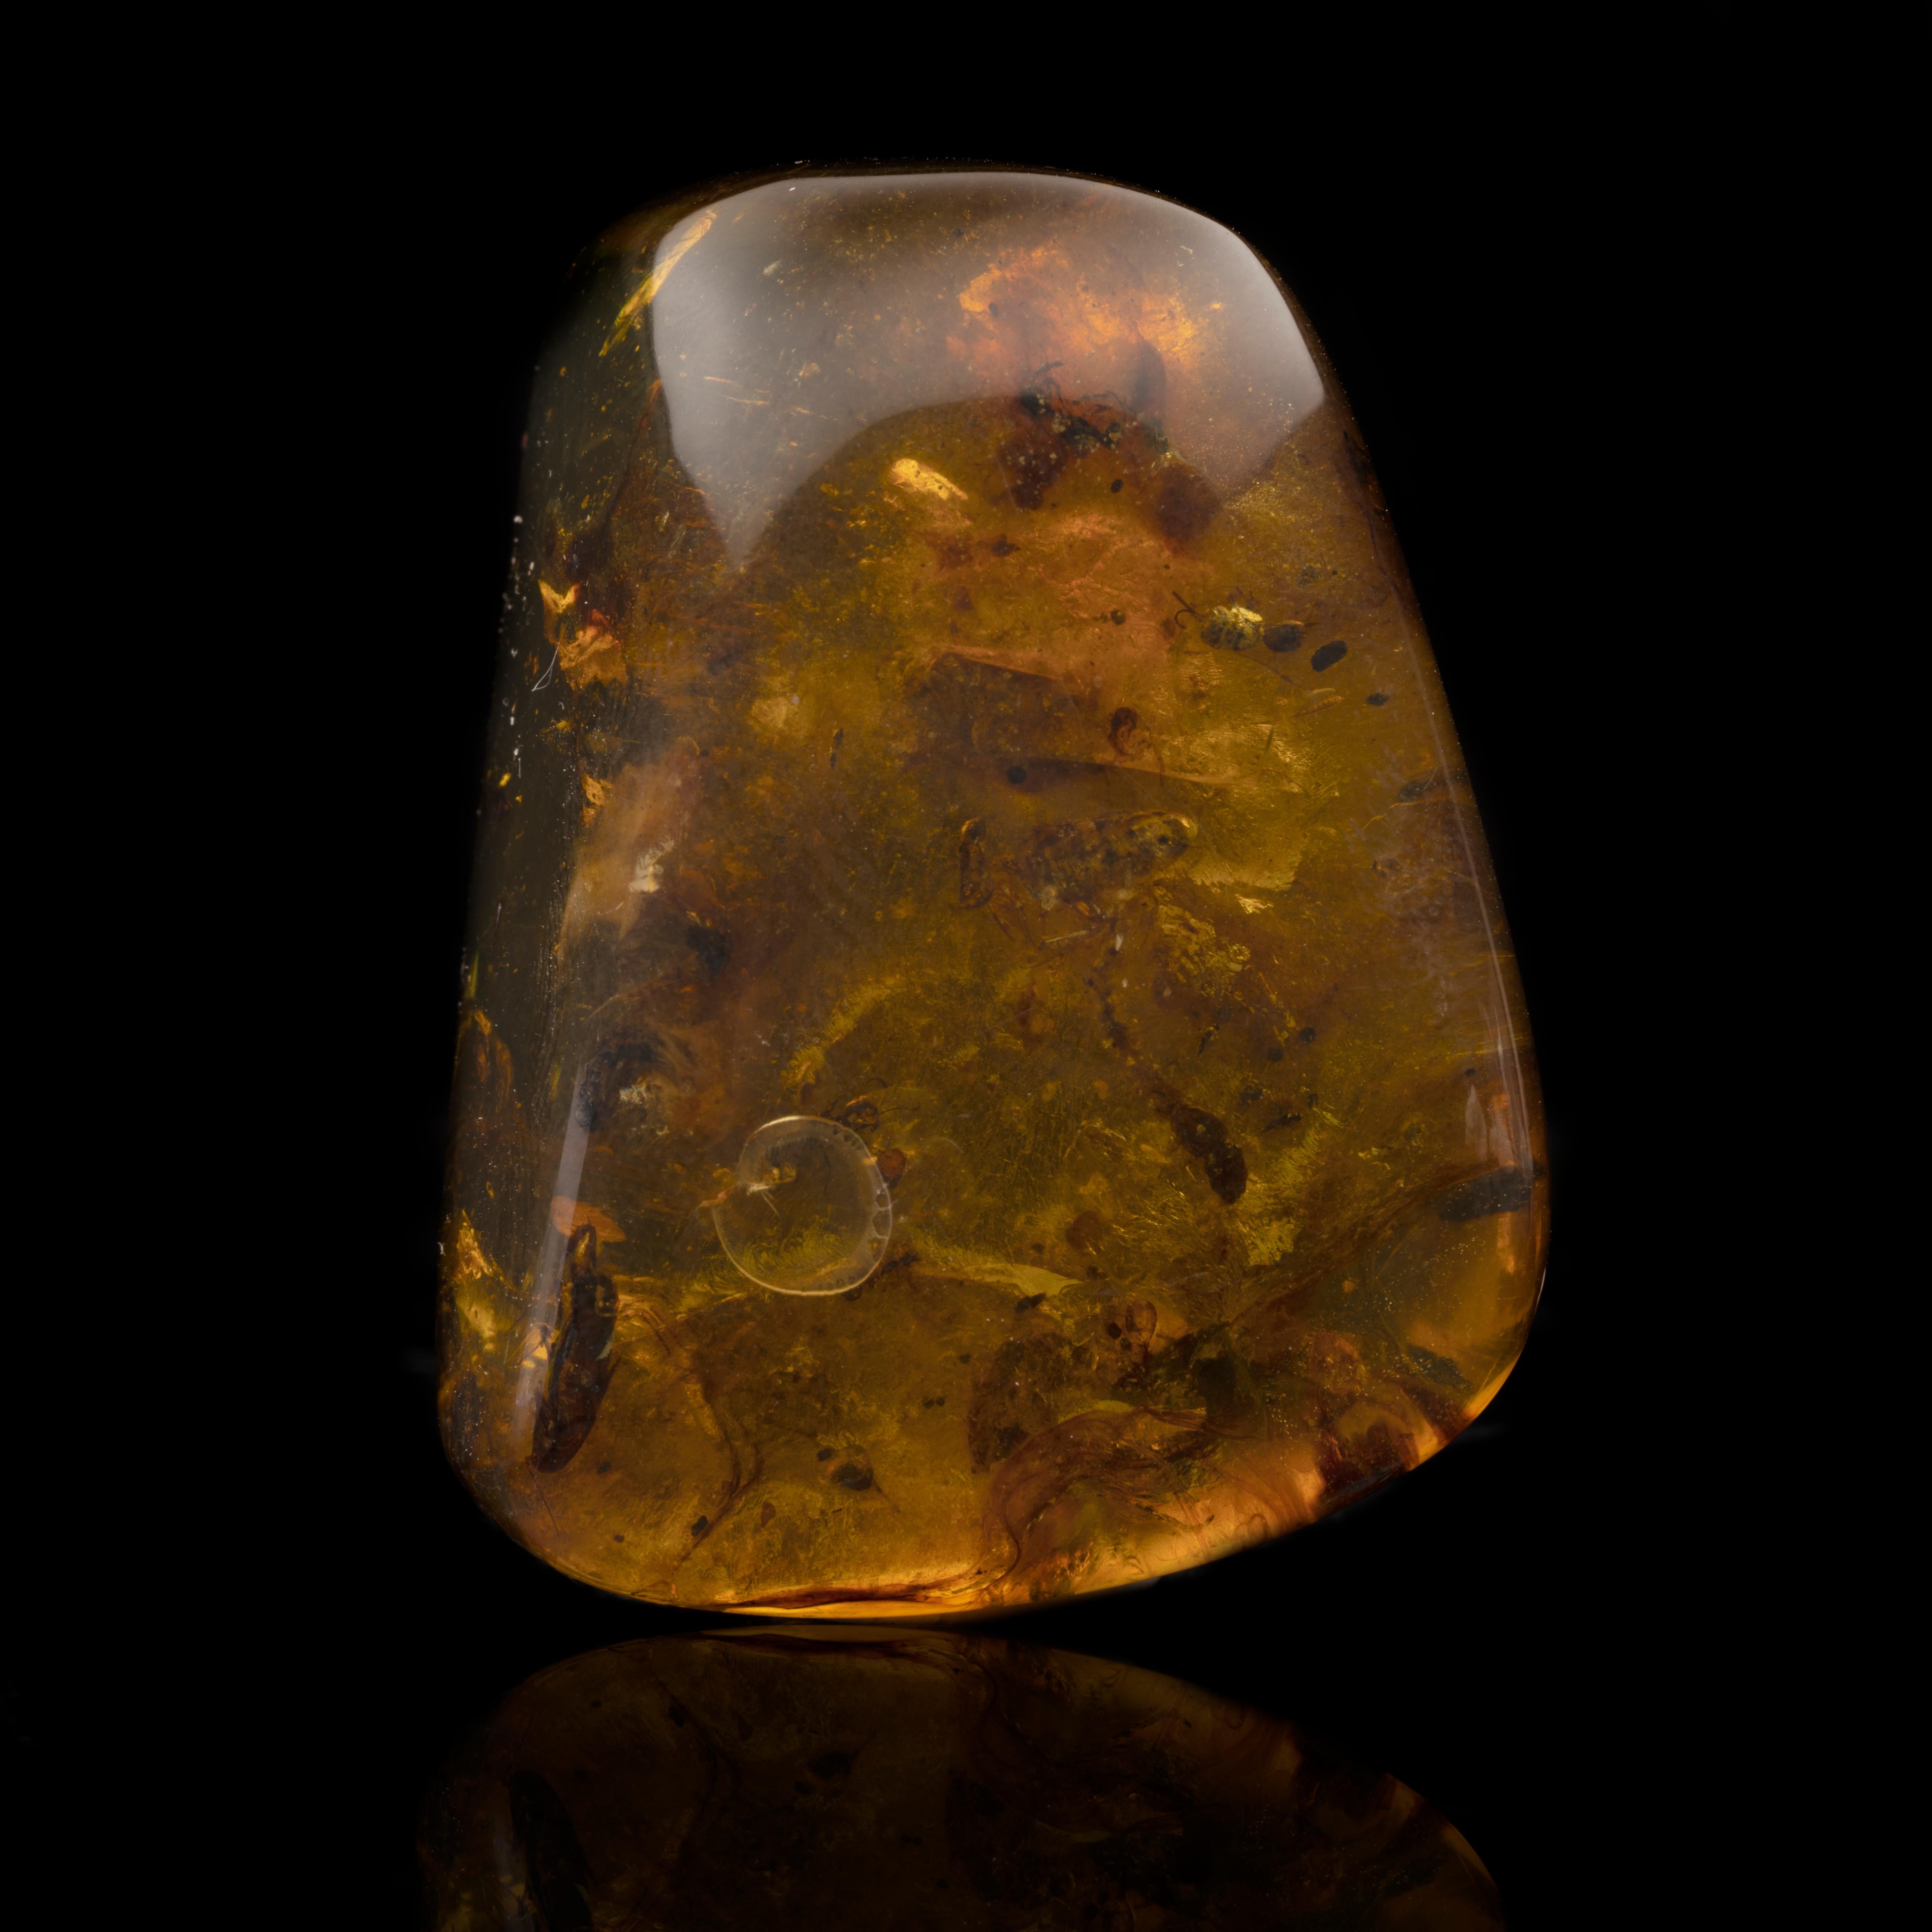 This genuine Burmese amber specimen dates back approximately 99 million years. Pieces like these are sometimes called a menagerie and this one contains snakefly larvae, a pseudoscorpion, cockroaches, a spider, beetle larvae, Hymenoptera (wasps), and